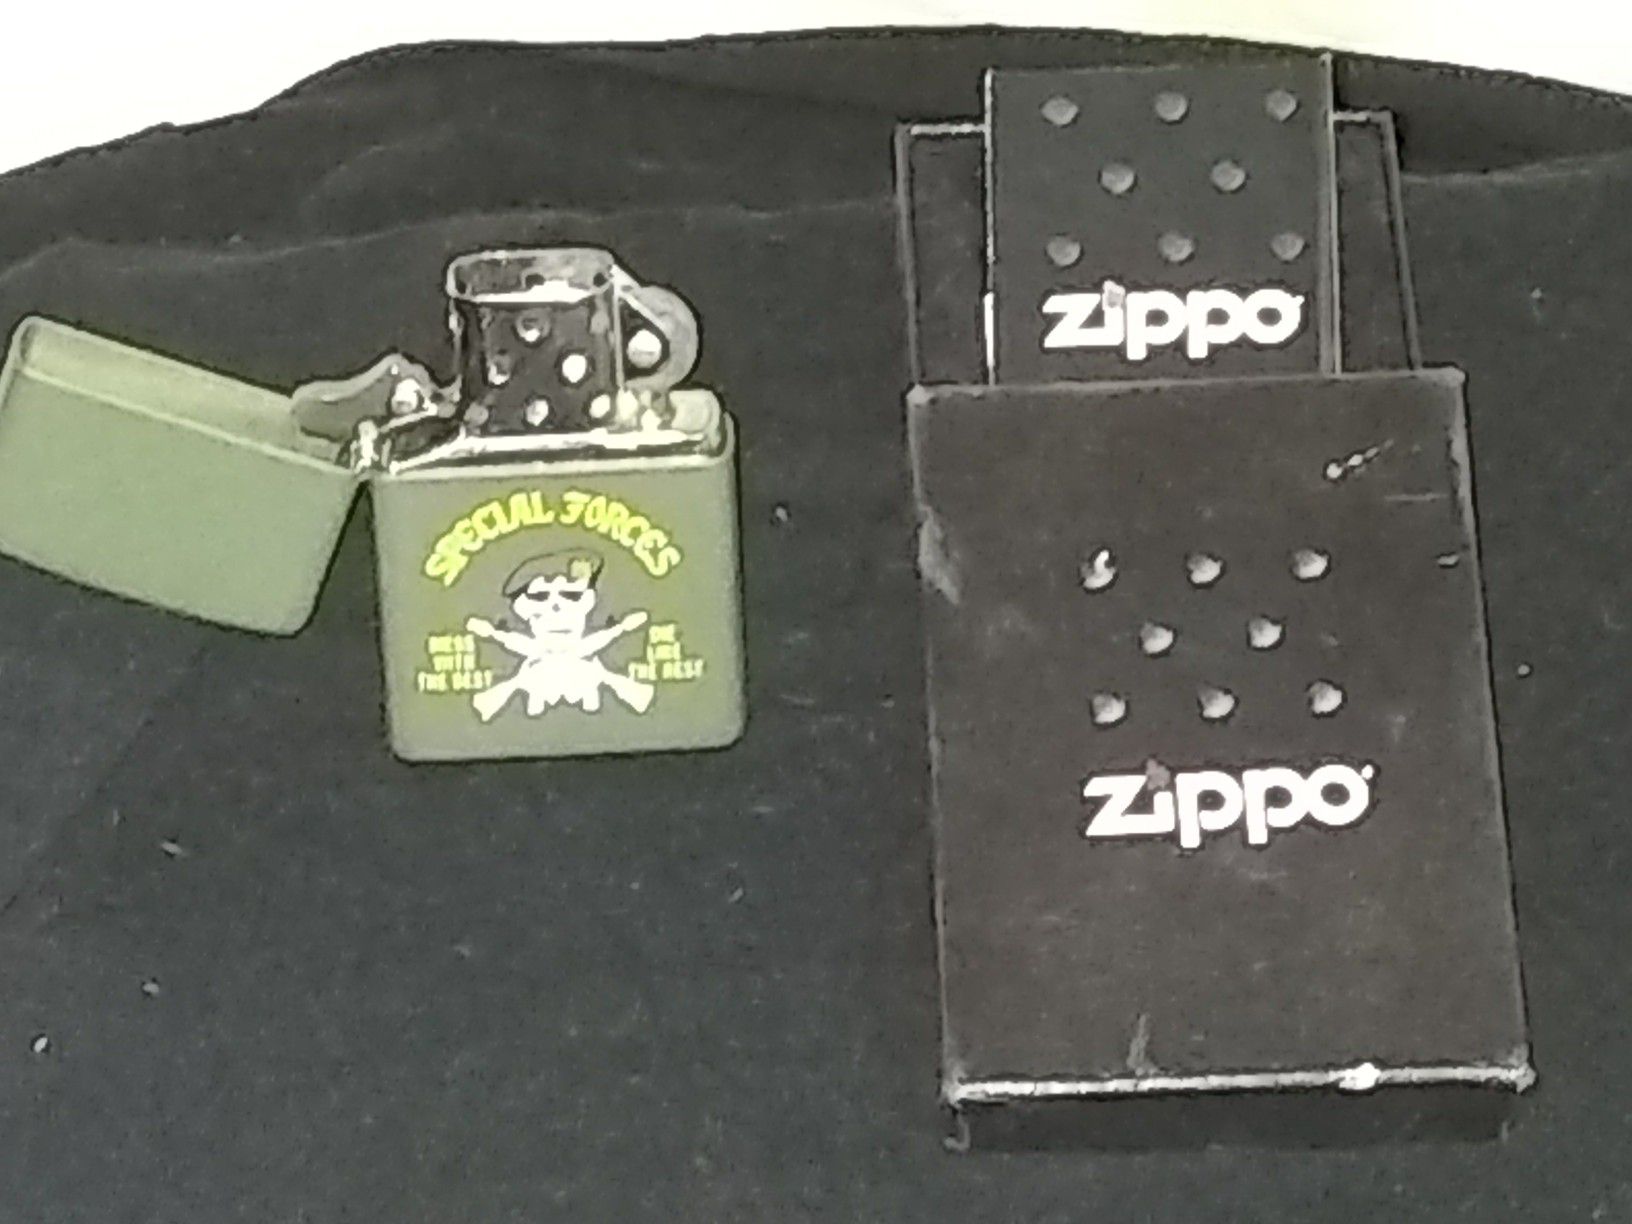 Special forces zippo